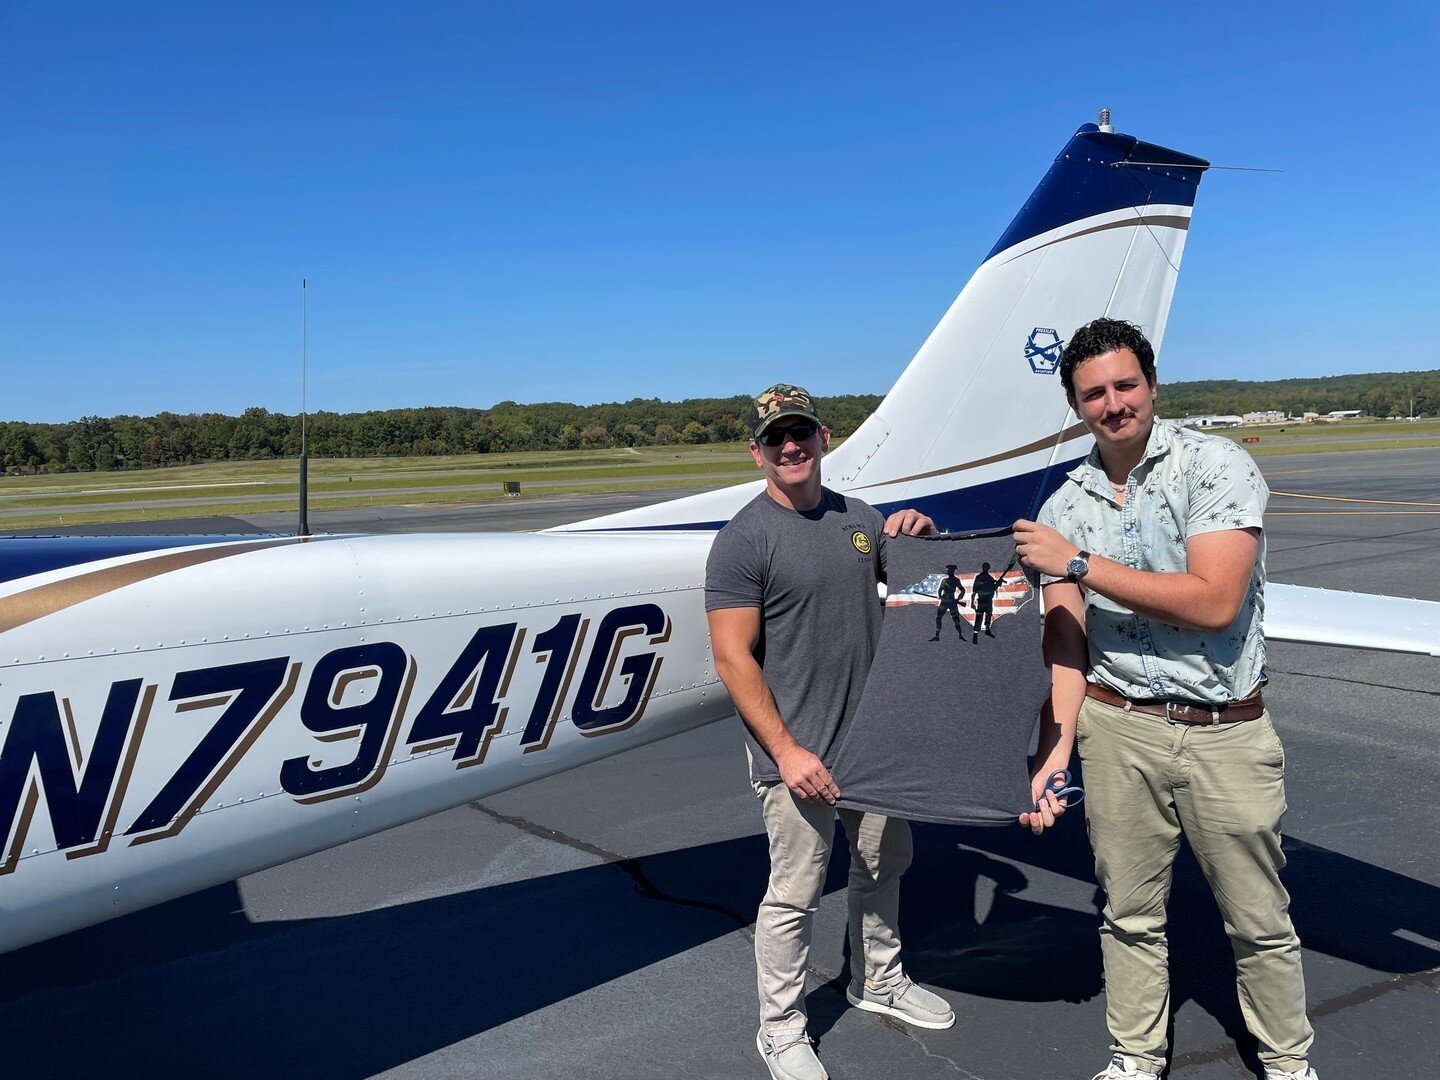 Let's give it up for Logan Shronce on completing his first ever SOLO flight!🔥👏🏼 Instructor: Josh Cabrera